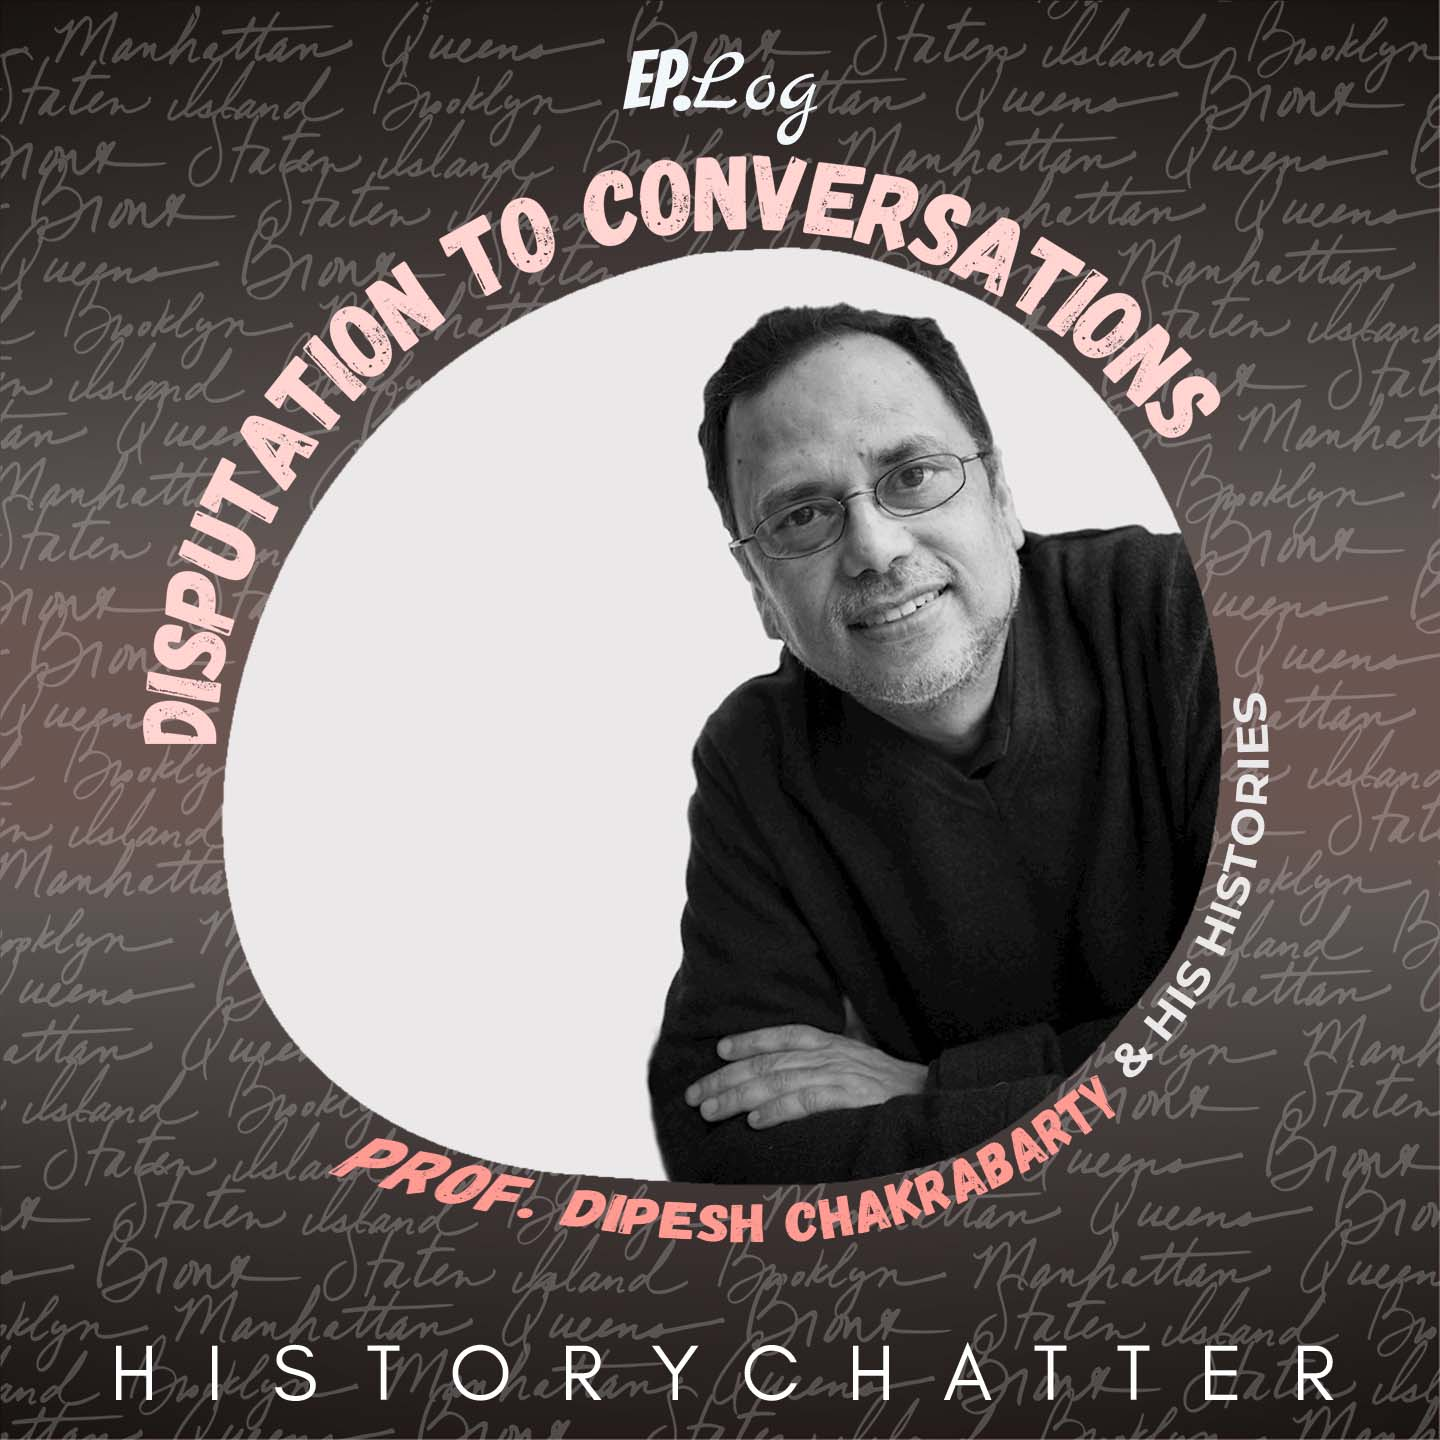 S2E5: Disputation To Conversations: Prof. Dipesh Chakrabarty and His Histories